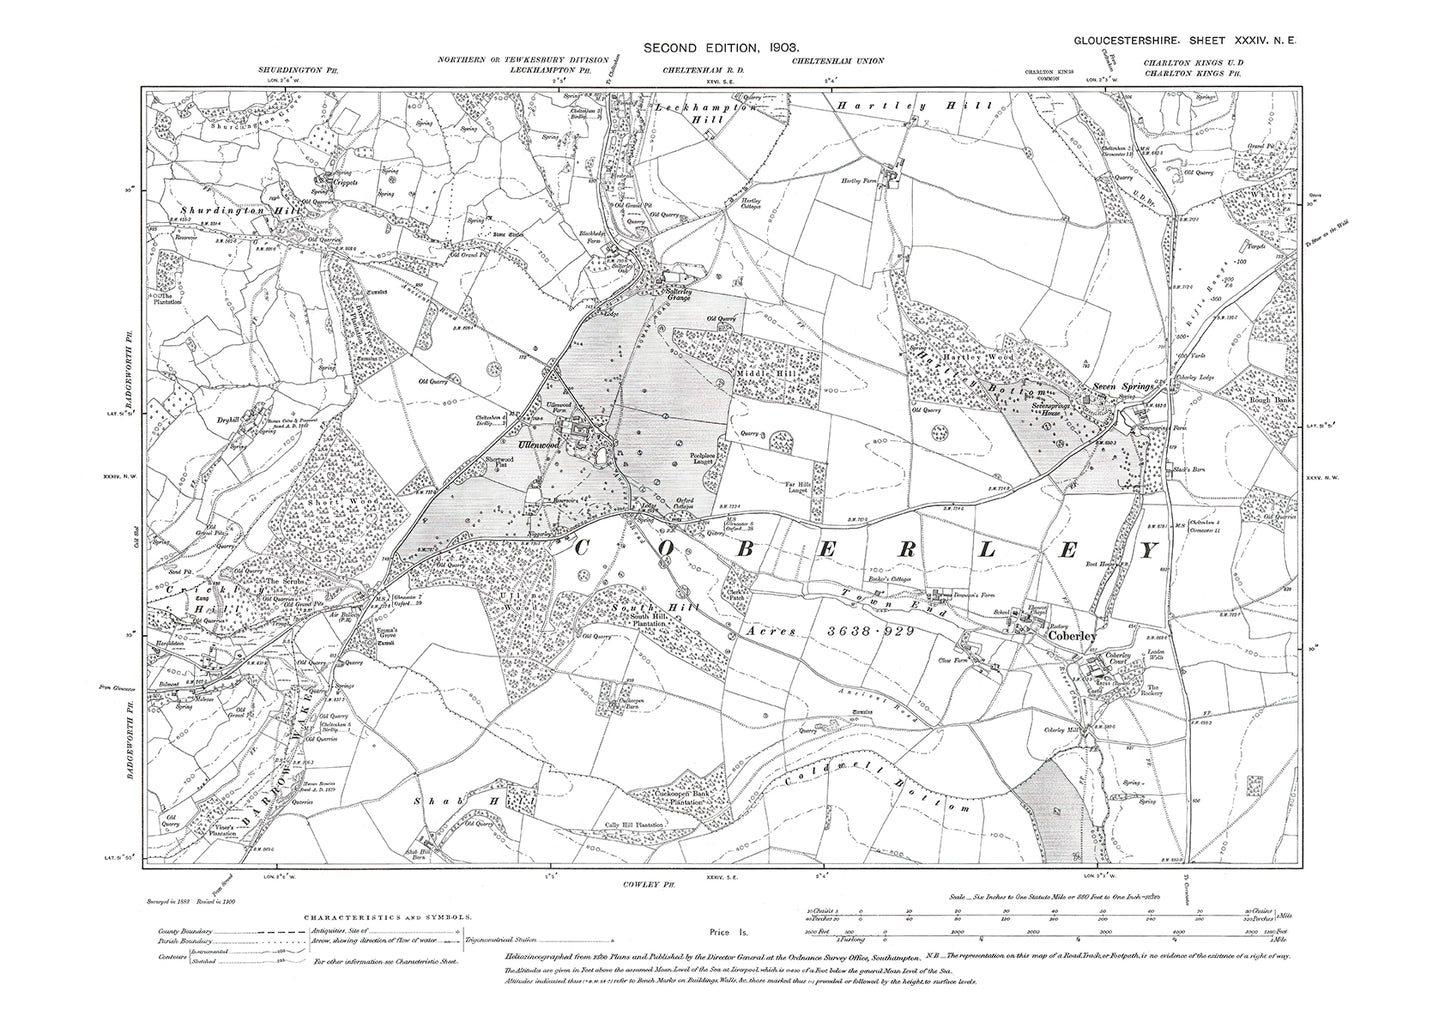 Old OS map dated 1903, showing Coberley in Gloucestershire - 34NE